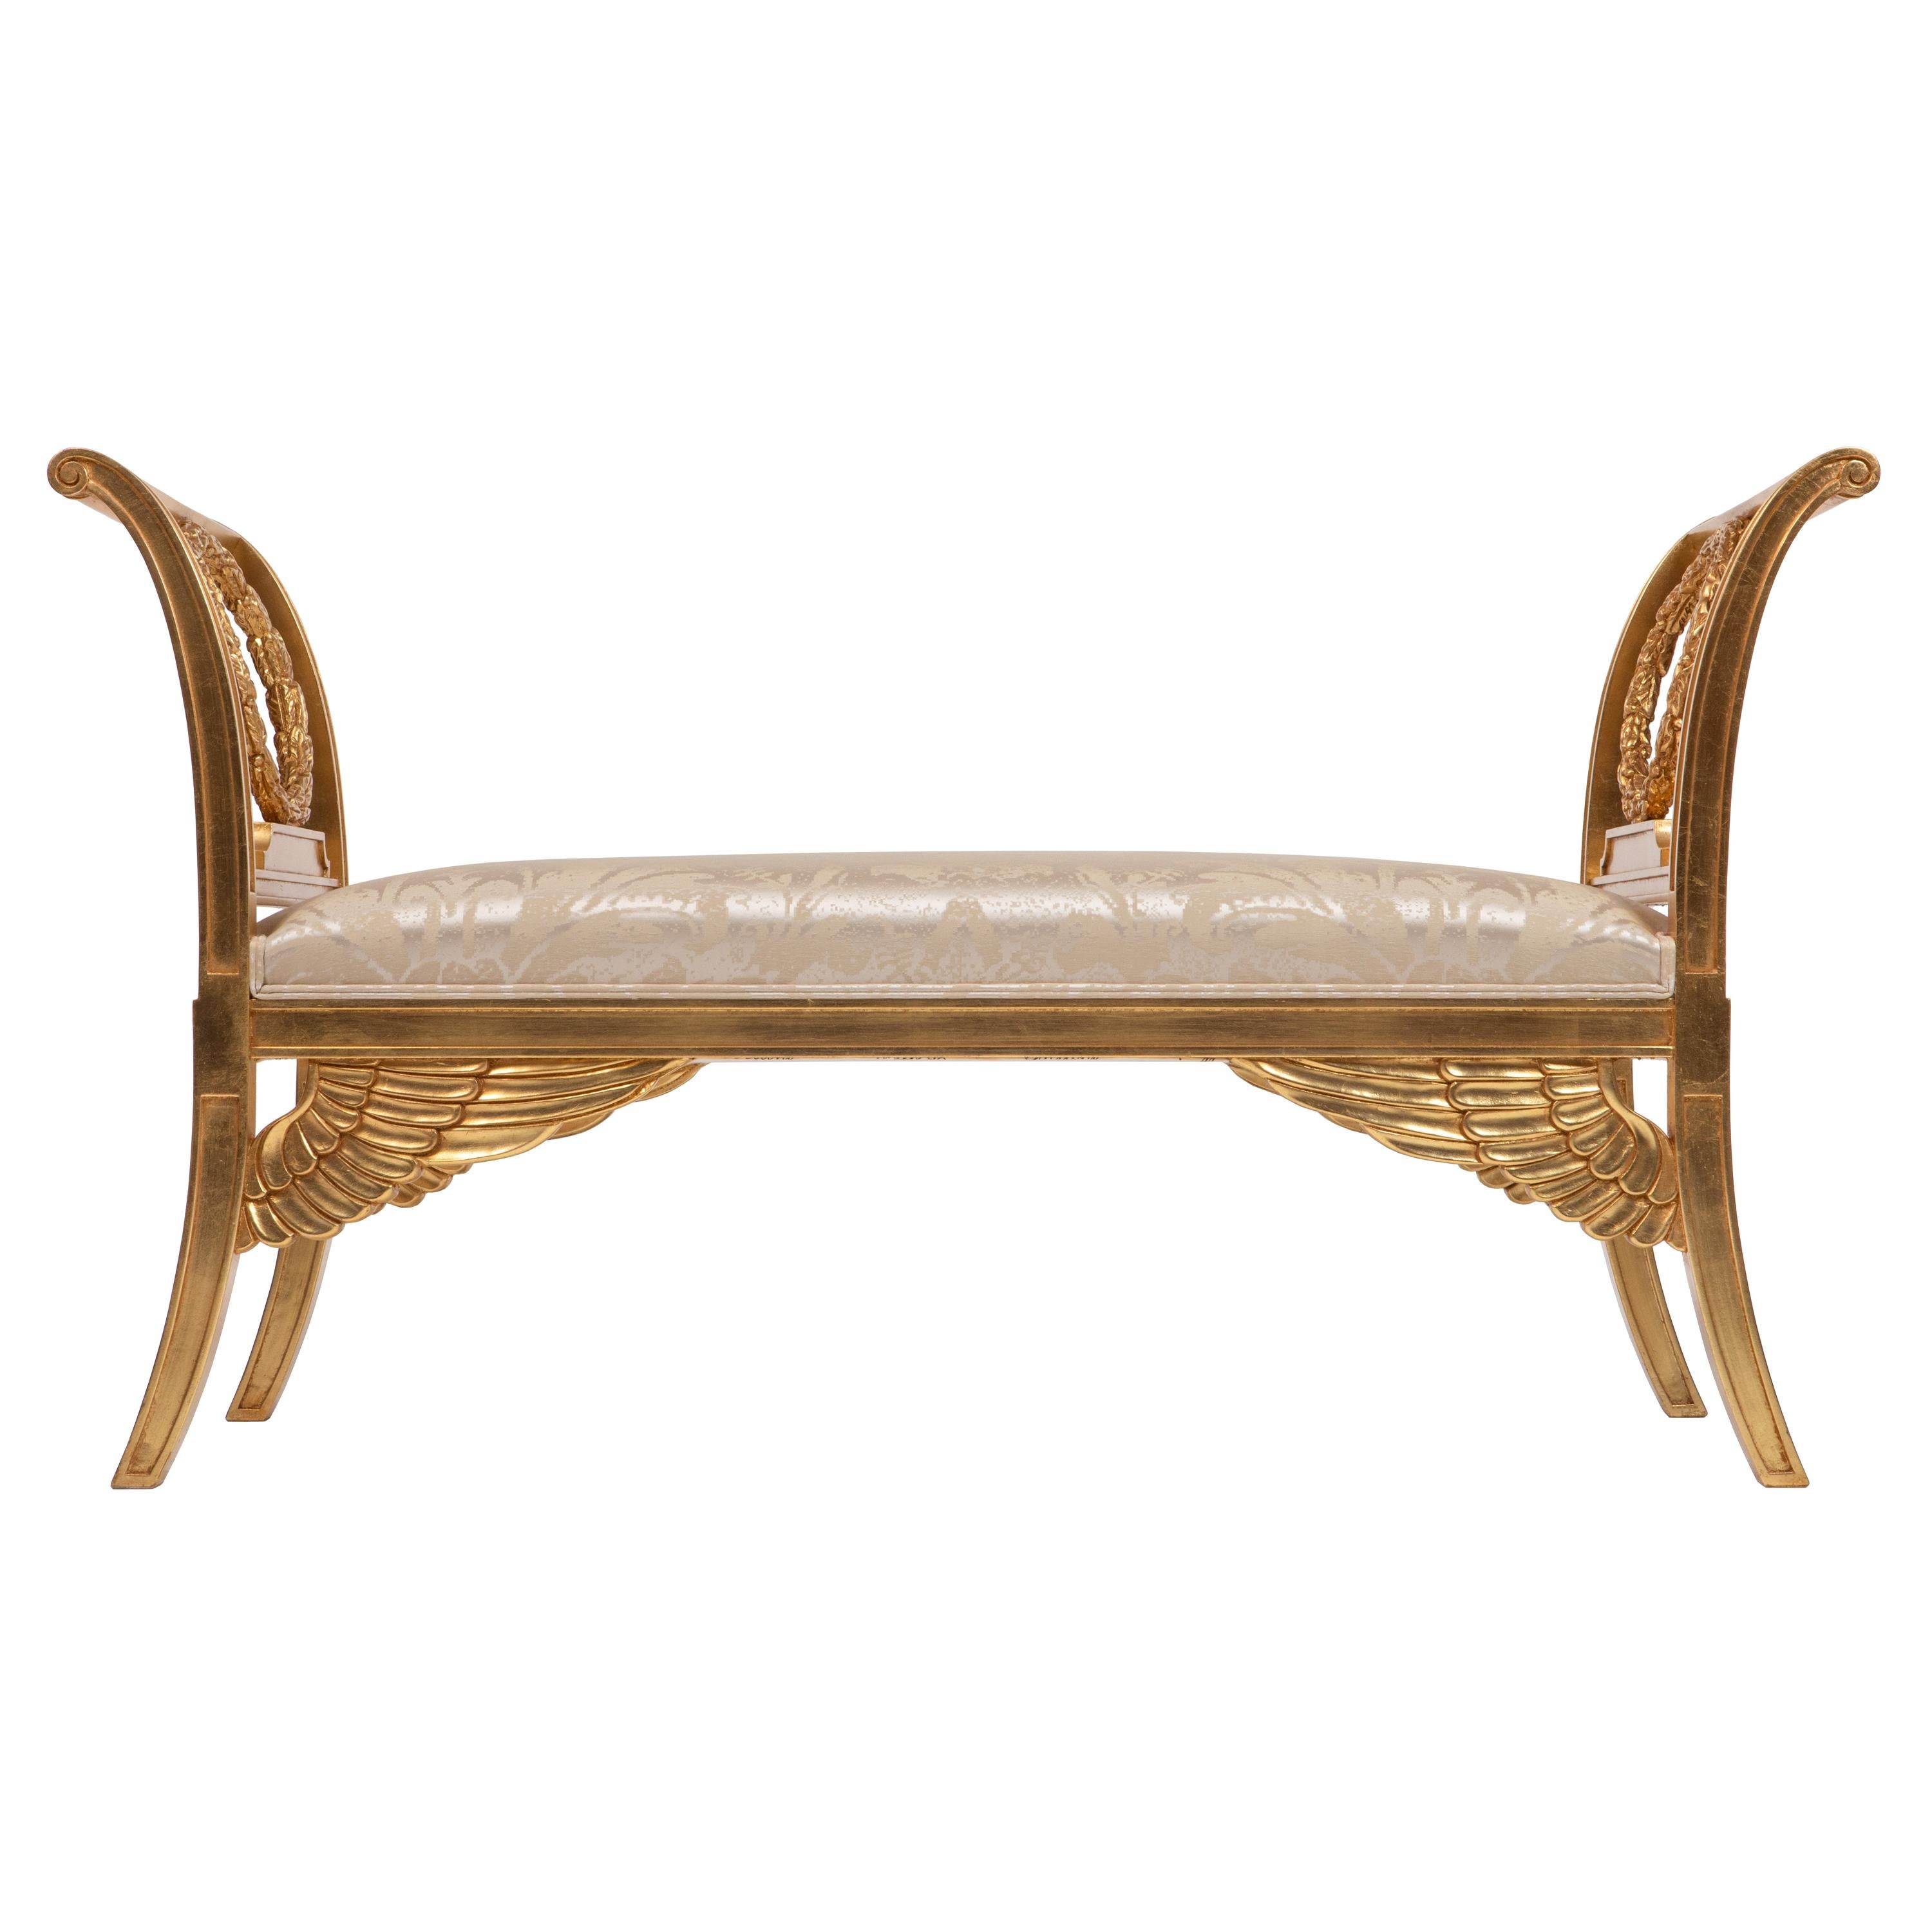 Empire Style Wooden Bench, Gold Leaf Finishing, Handcarved and Made in Italy For Sale